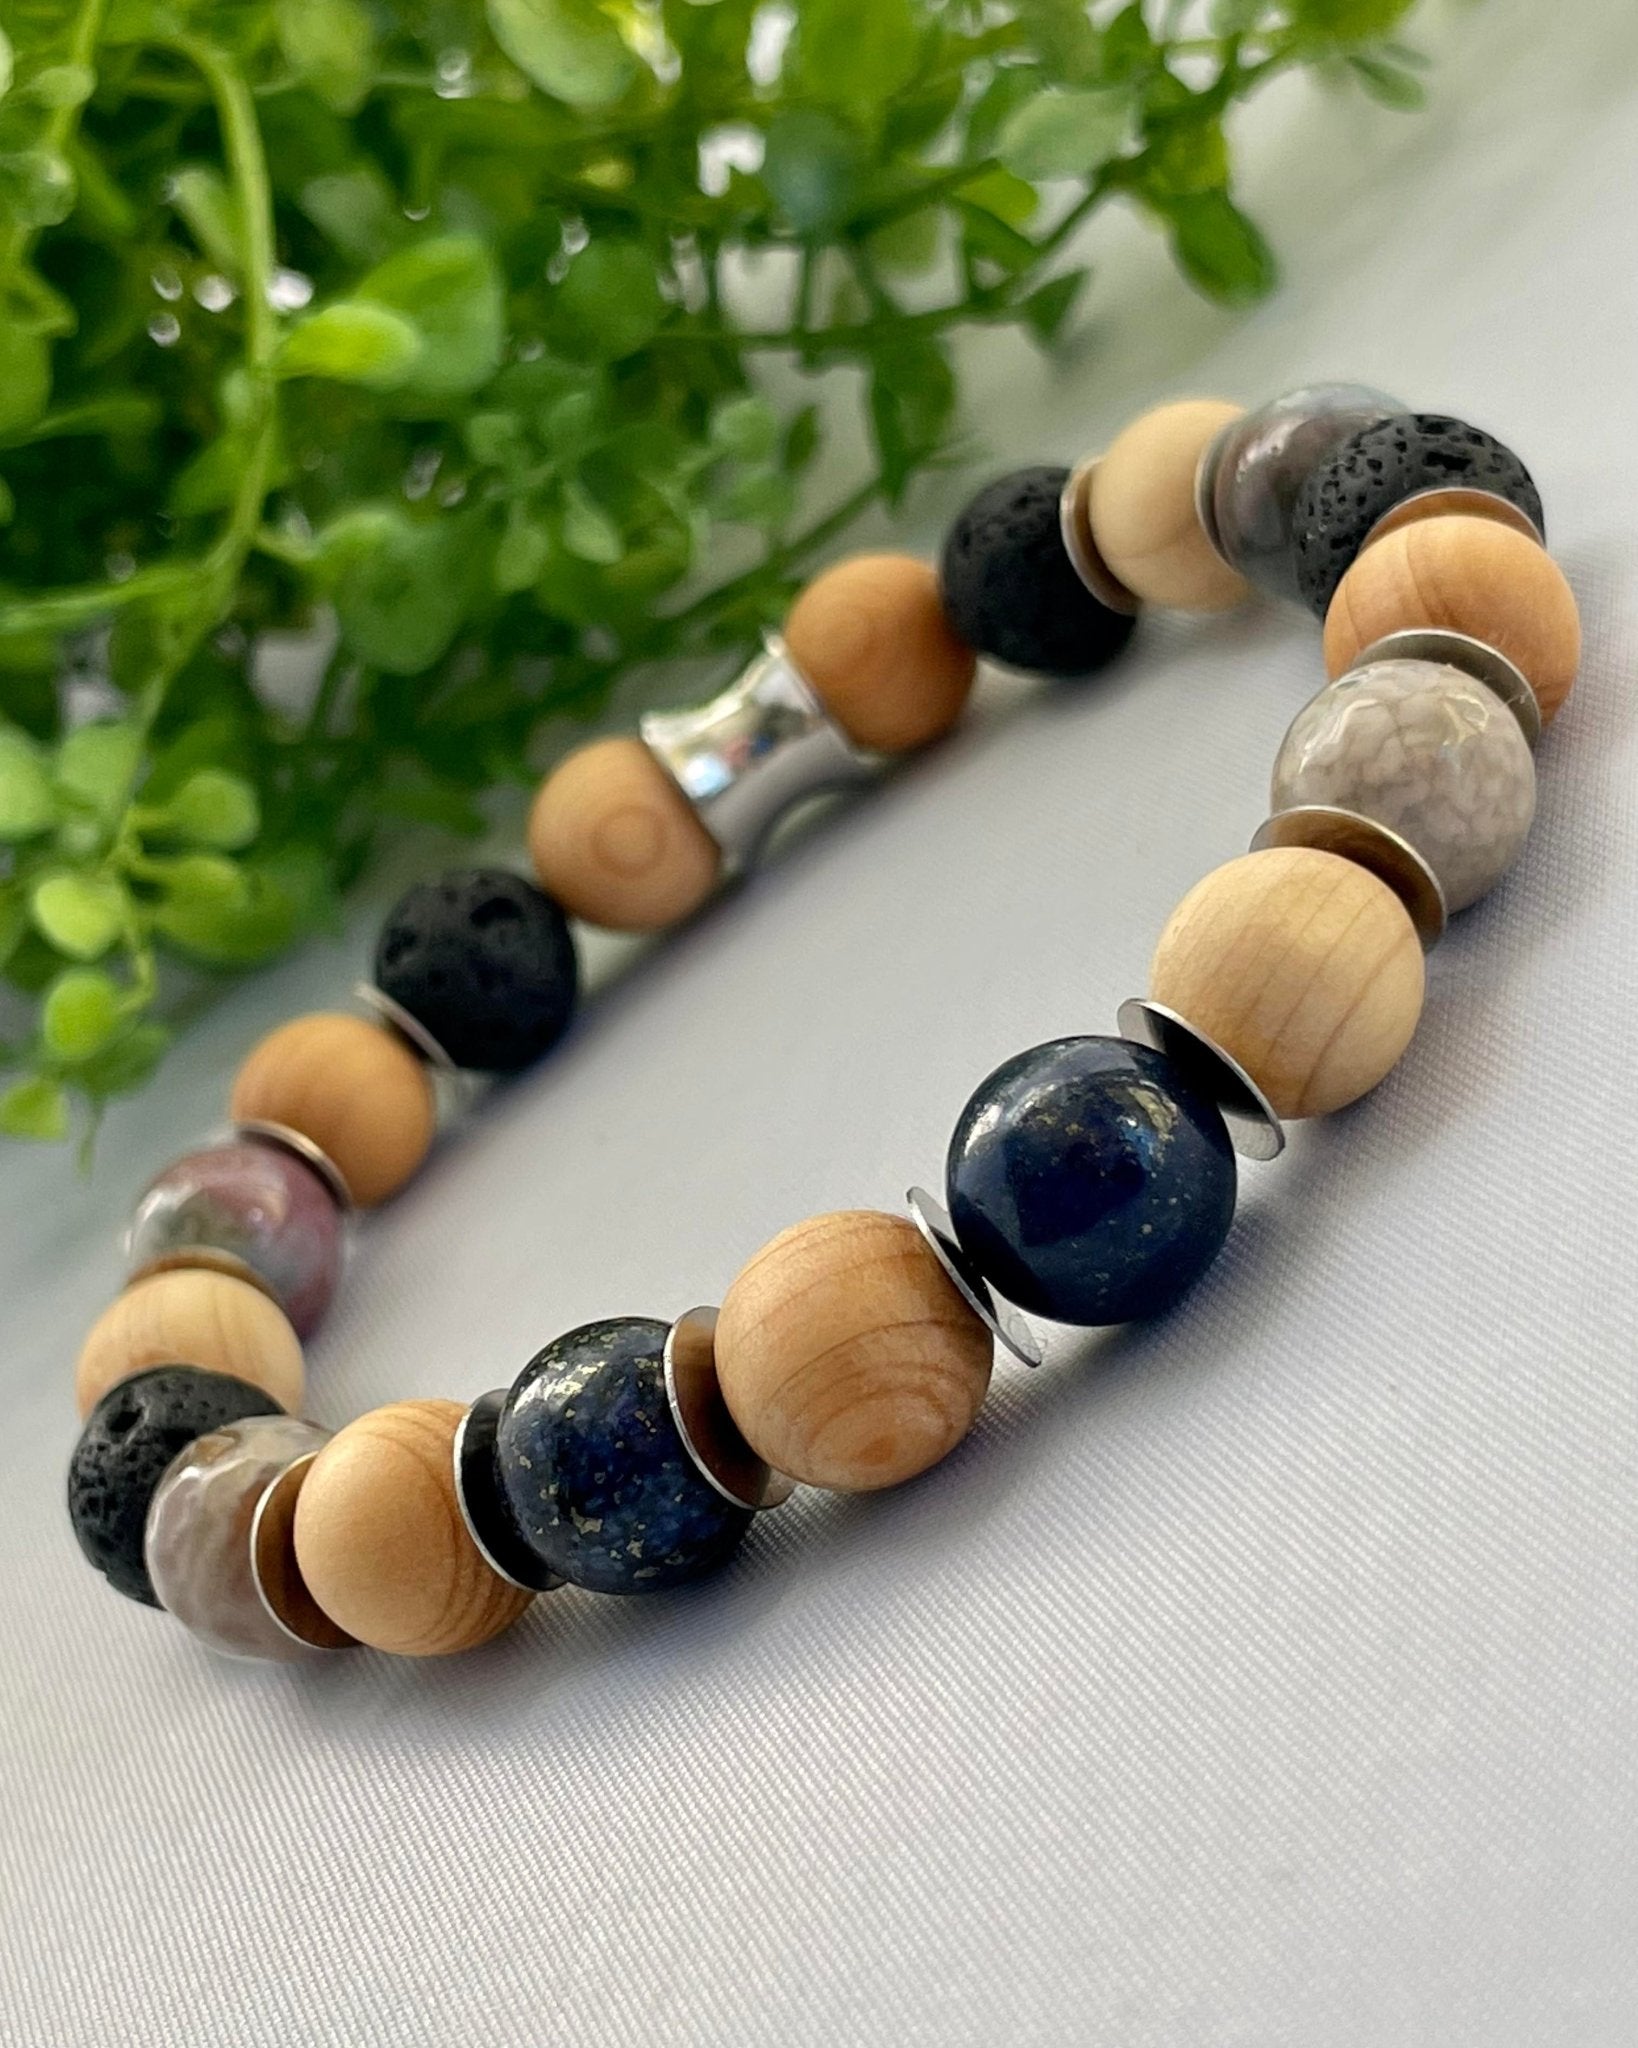 Aromatherapy Essential Oil Diffuser Lava & Sandalwood Beads with Agate & Lapis Lazuli Stones Stretch Bracelet - CYR'S CREATIONS